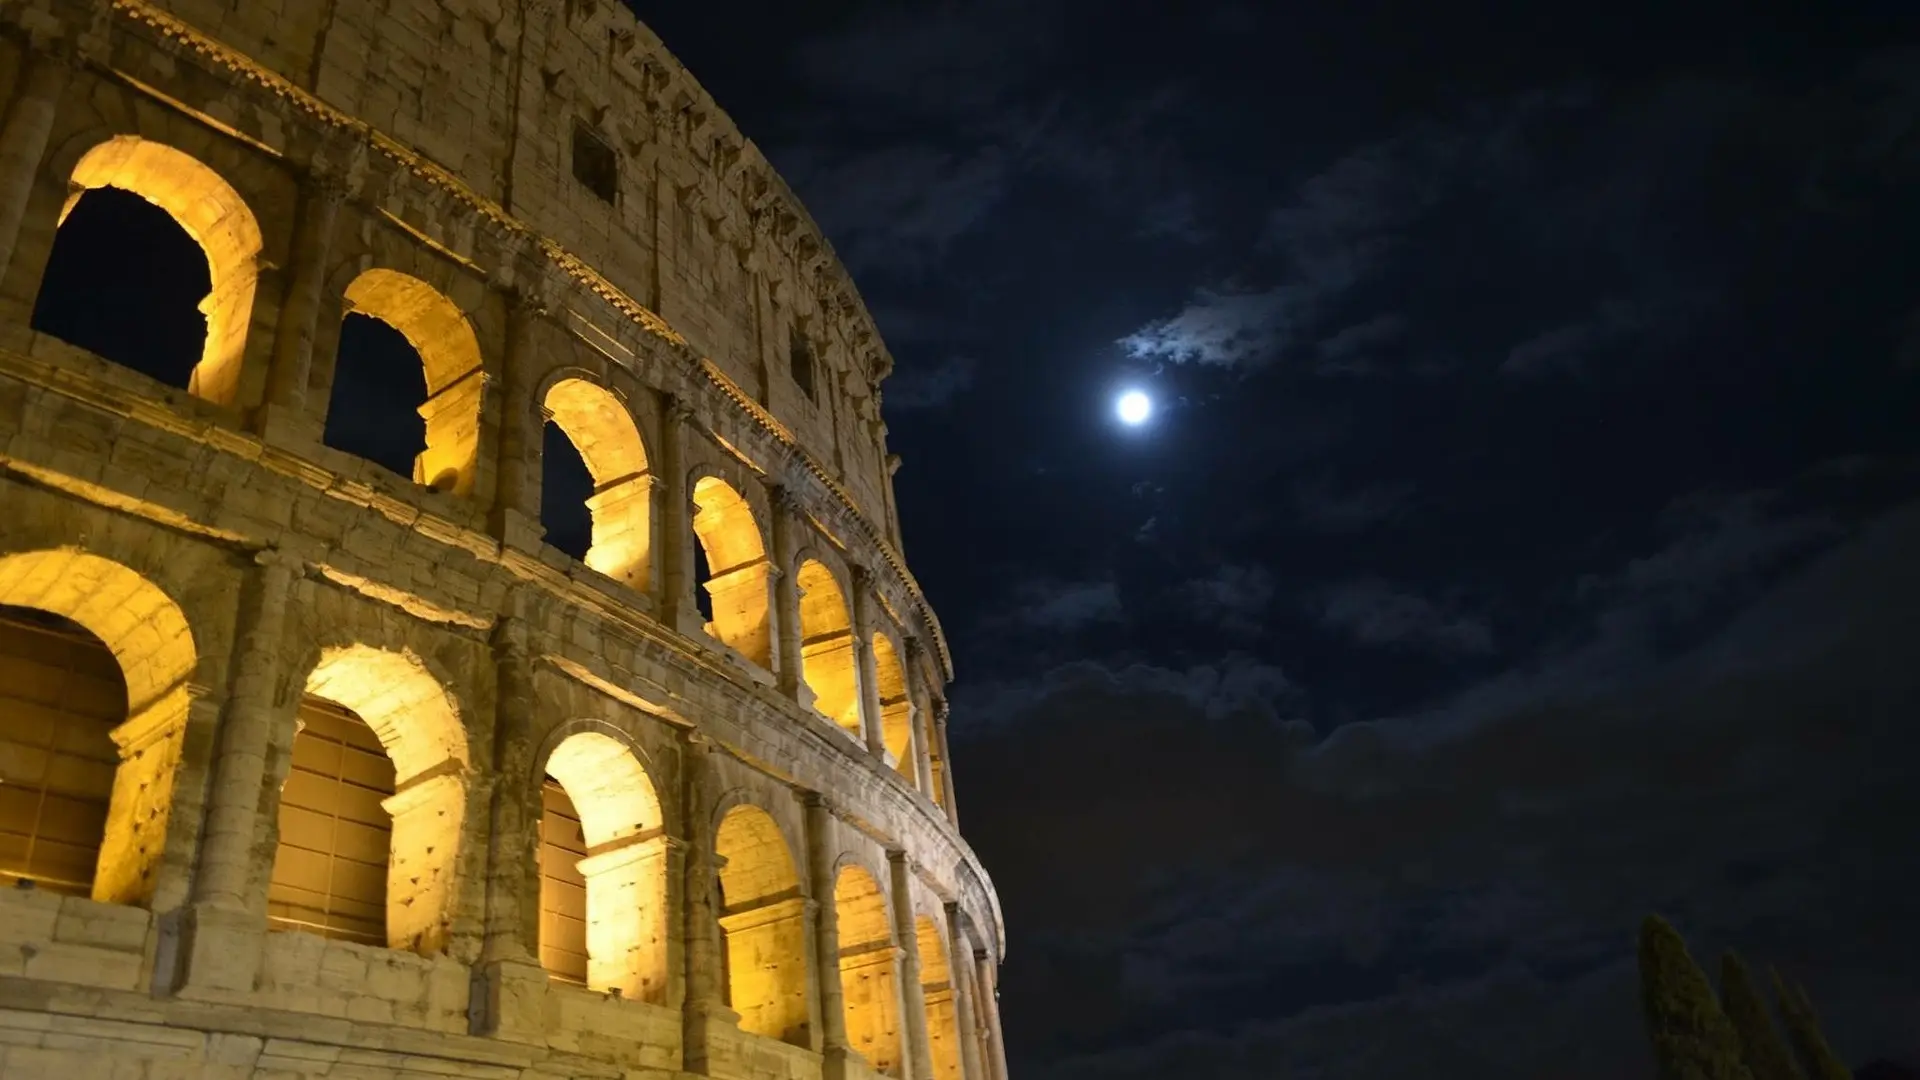 "Exterior view of the Colosseum at night, highlighted by artificial lights that accentuate its grand arches and rugged texture against a dark sky, conveying a sense of historical majesty and enduring architectural significance in Rome's cityscape."